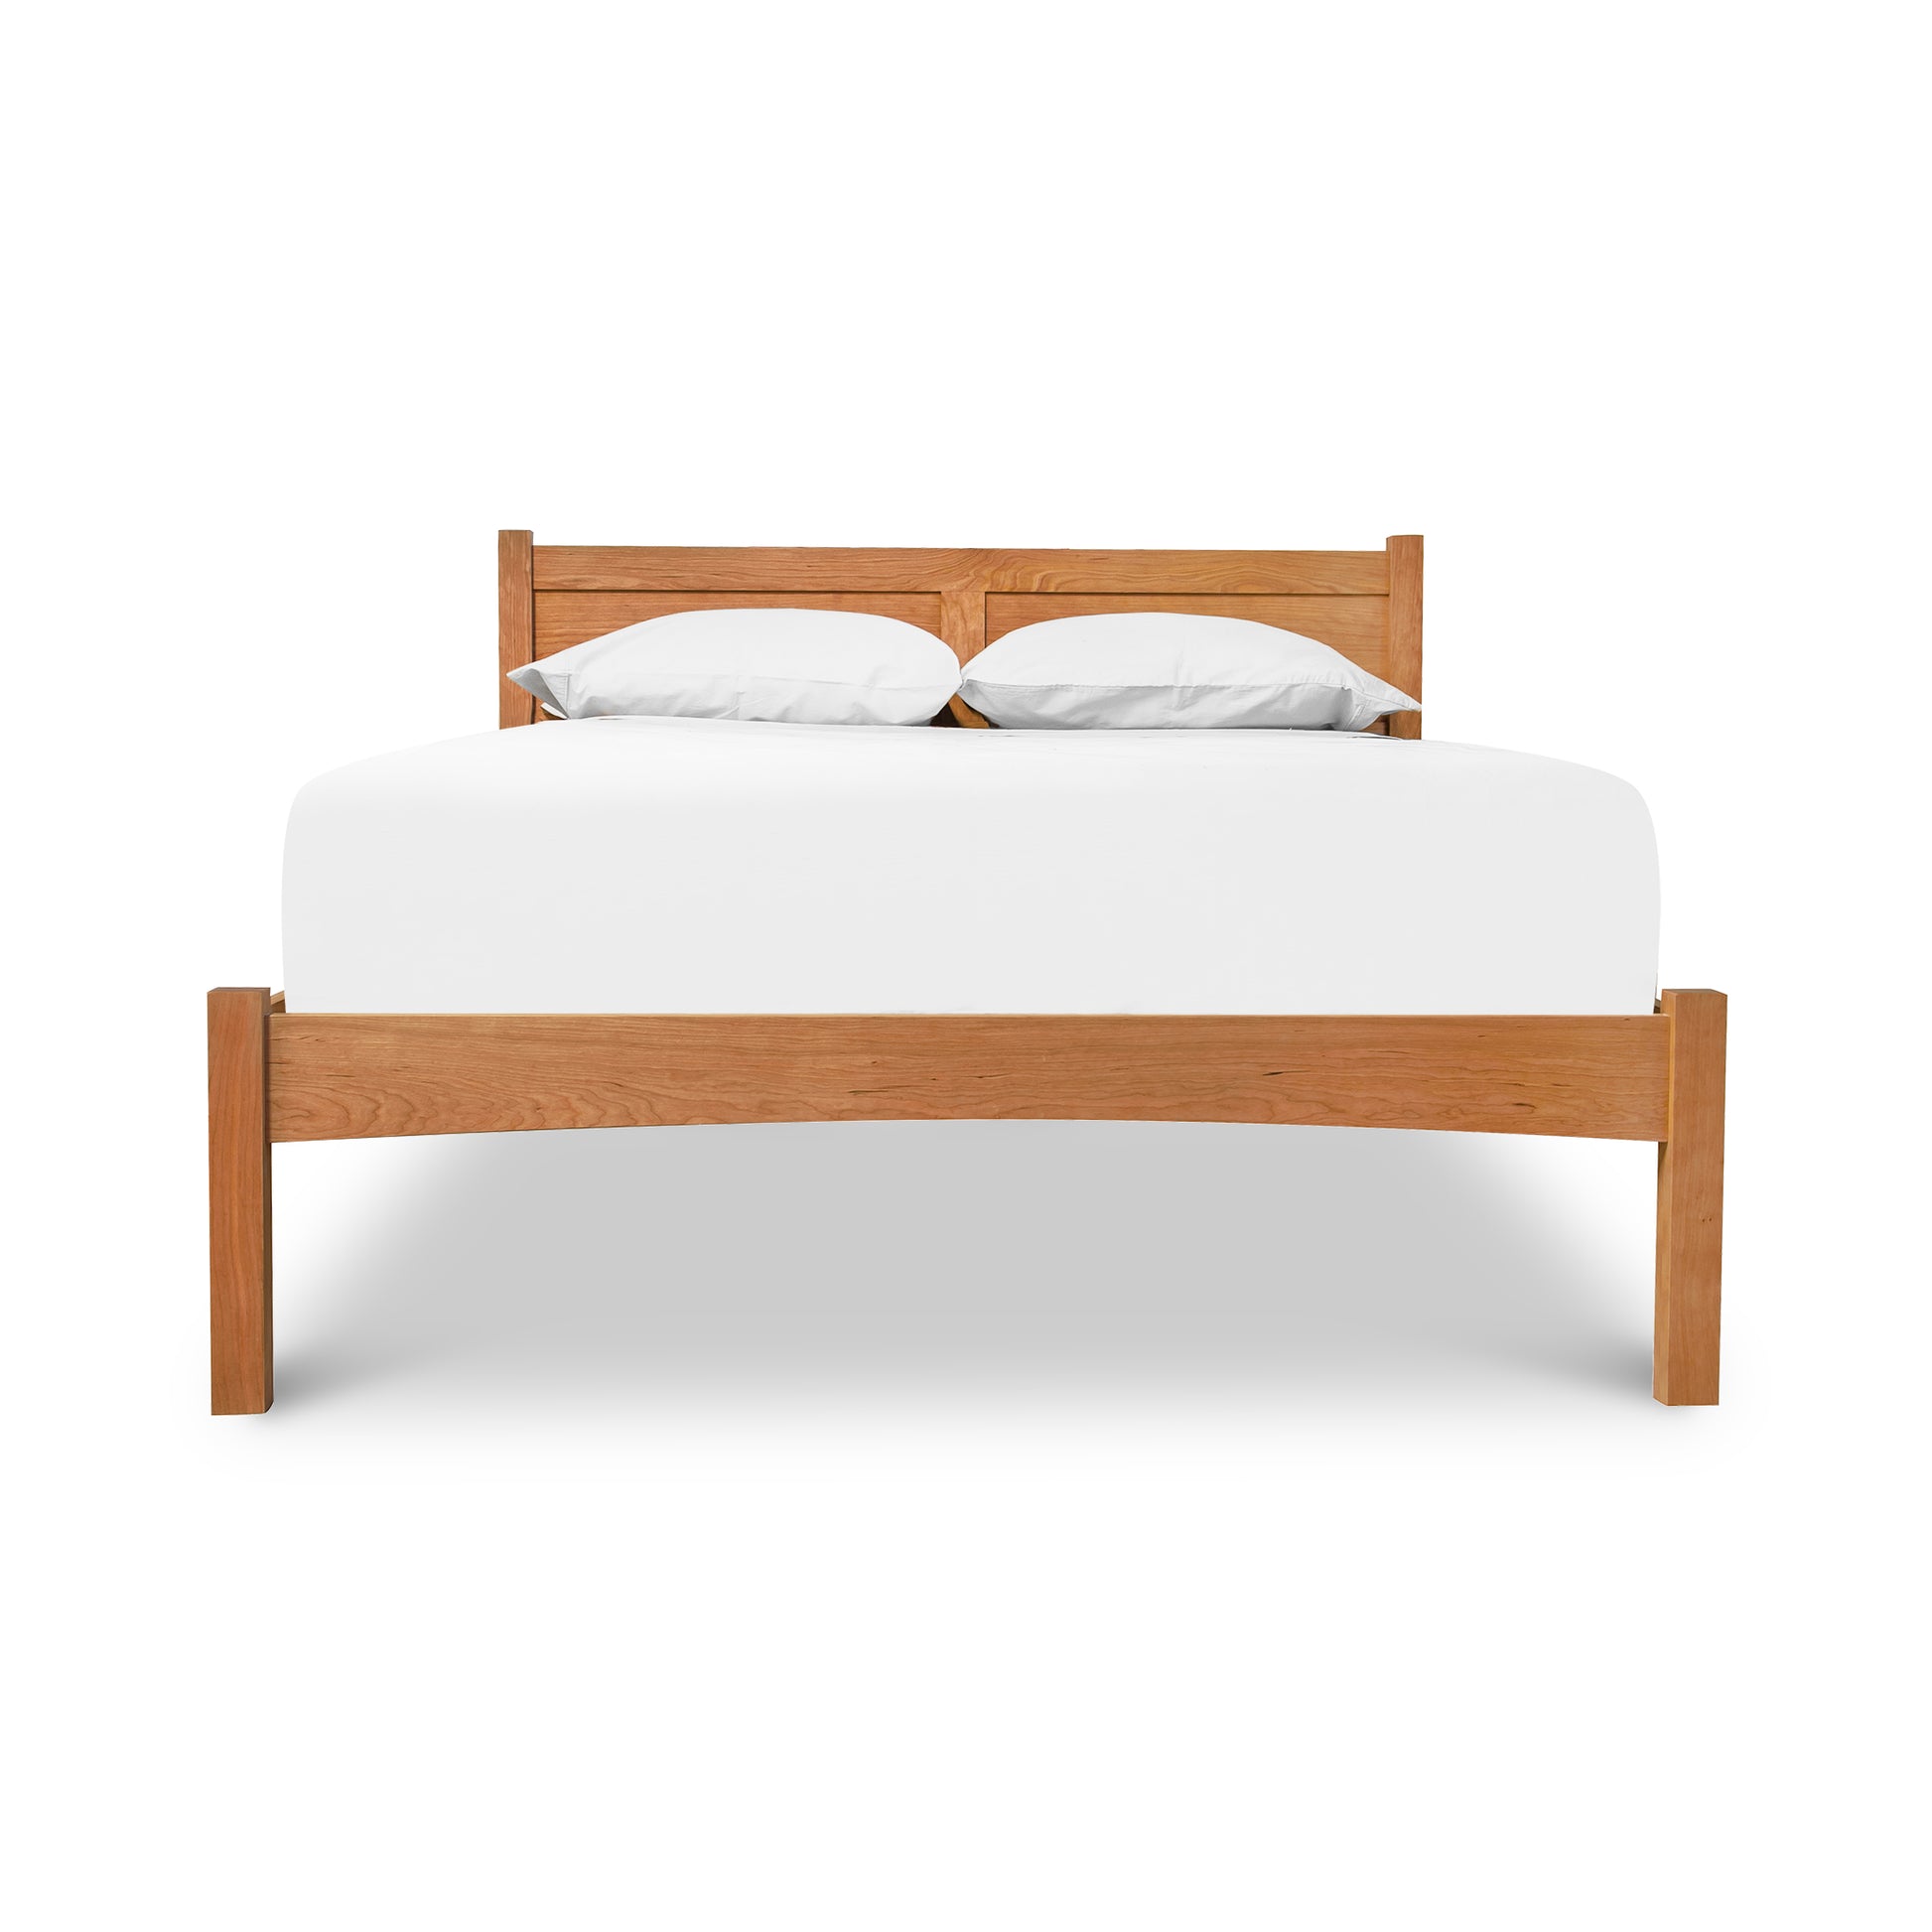 A cherry wood Vermont Furniture Designs Essex Low Footboard Bed with white bedding isolated on a white background.